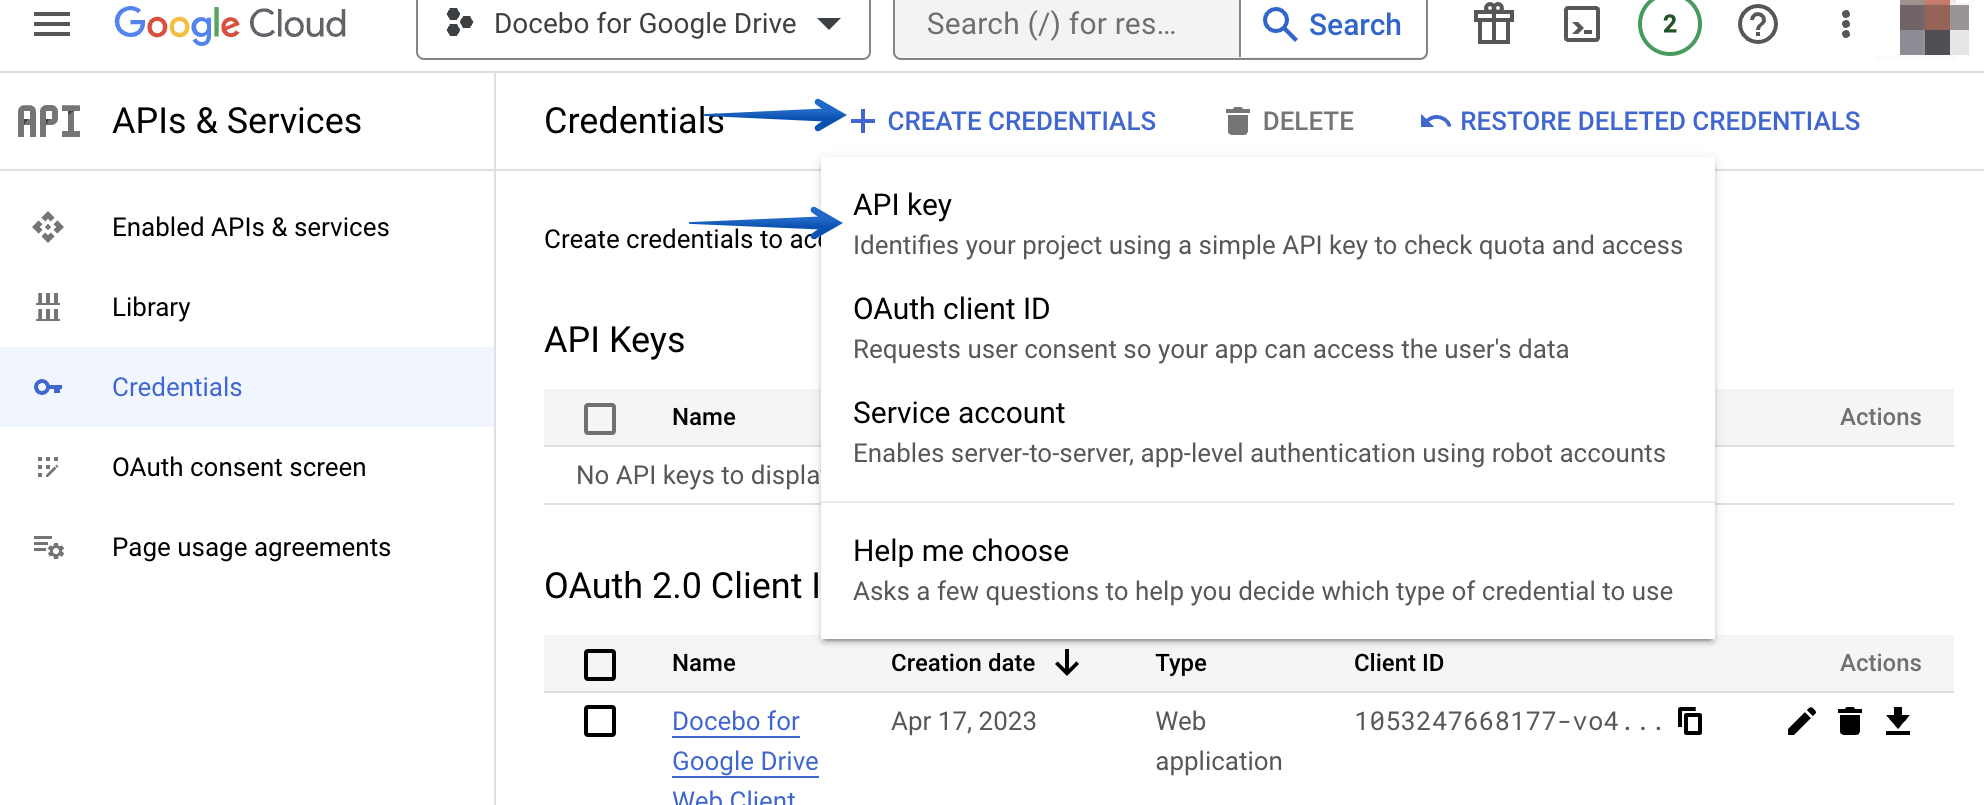 Pressing Create Credentials and selecting API key from the drop-down list